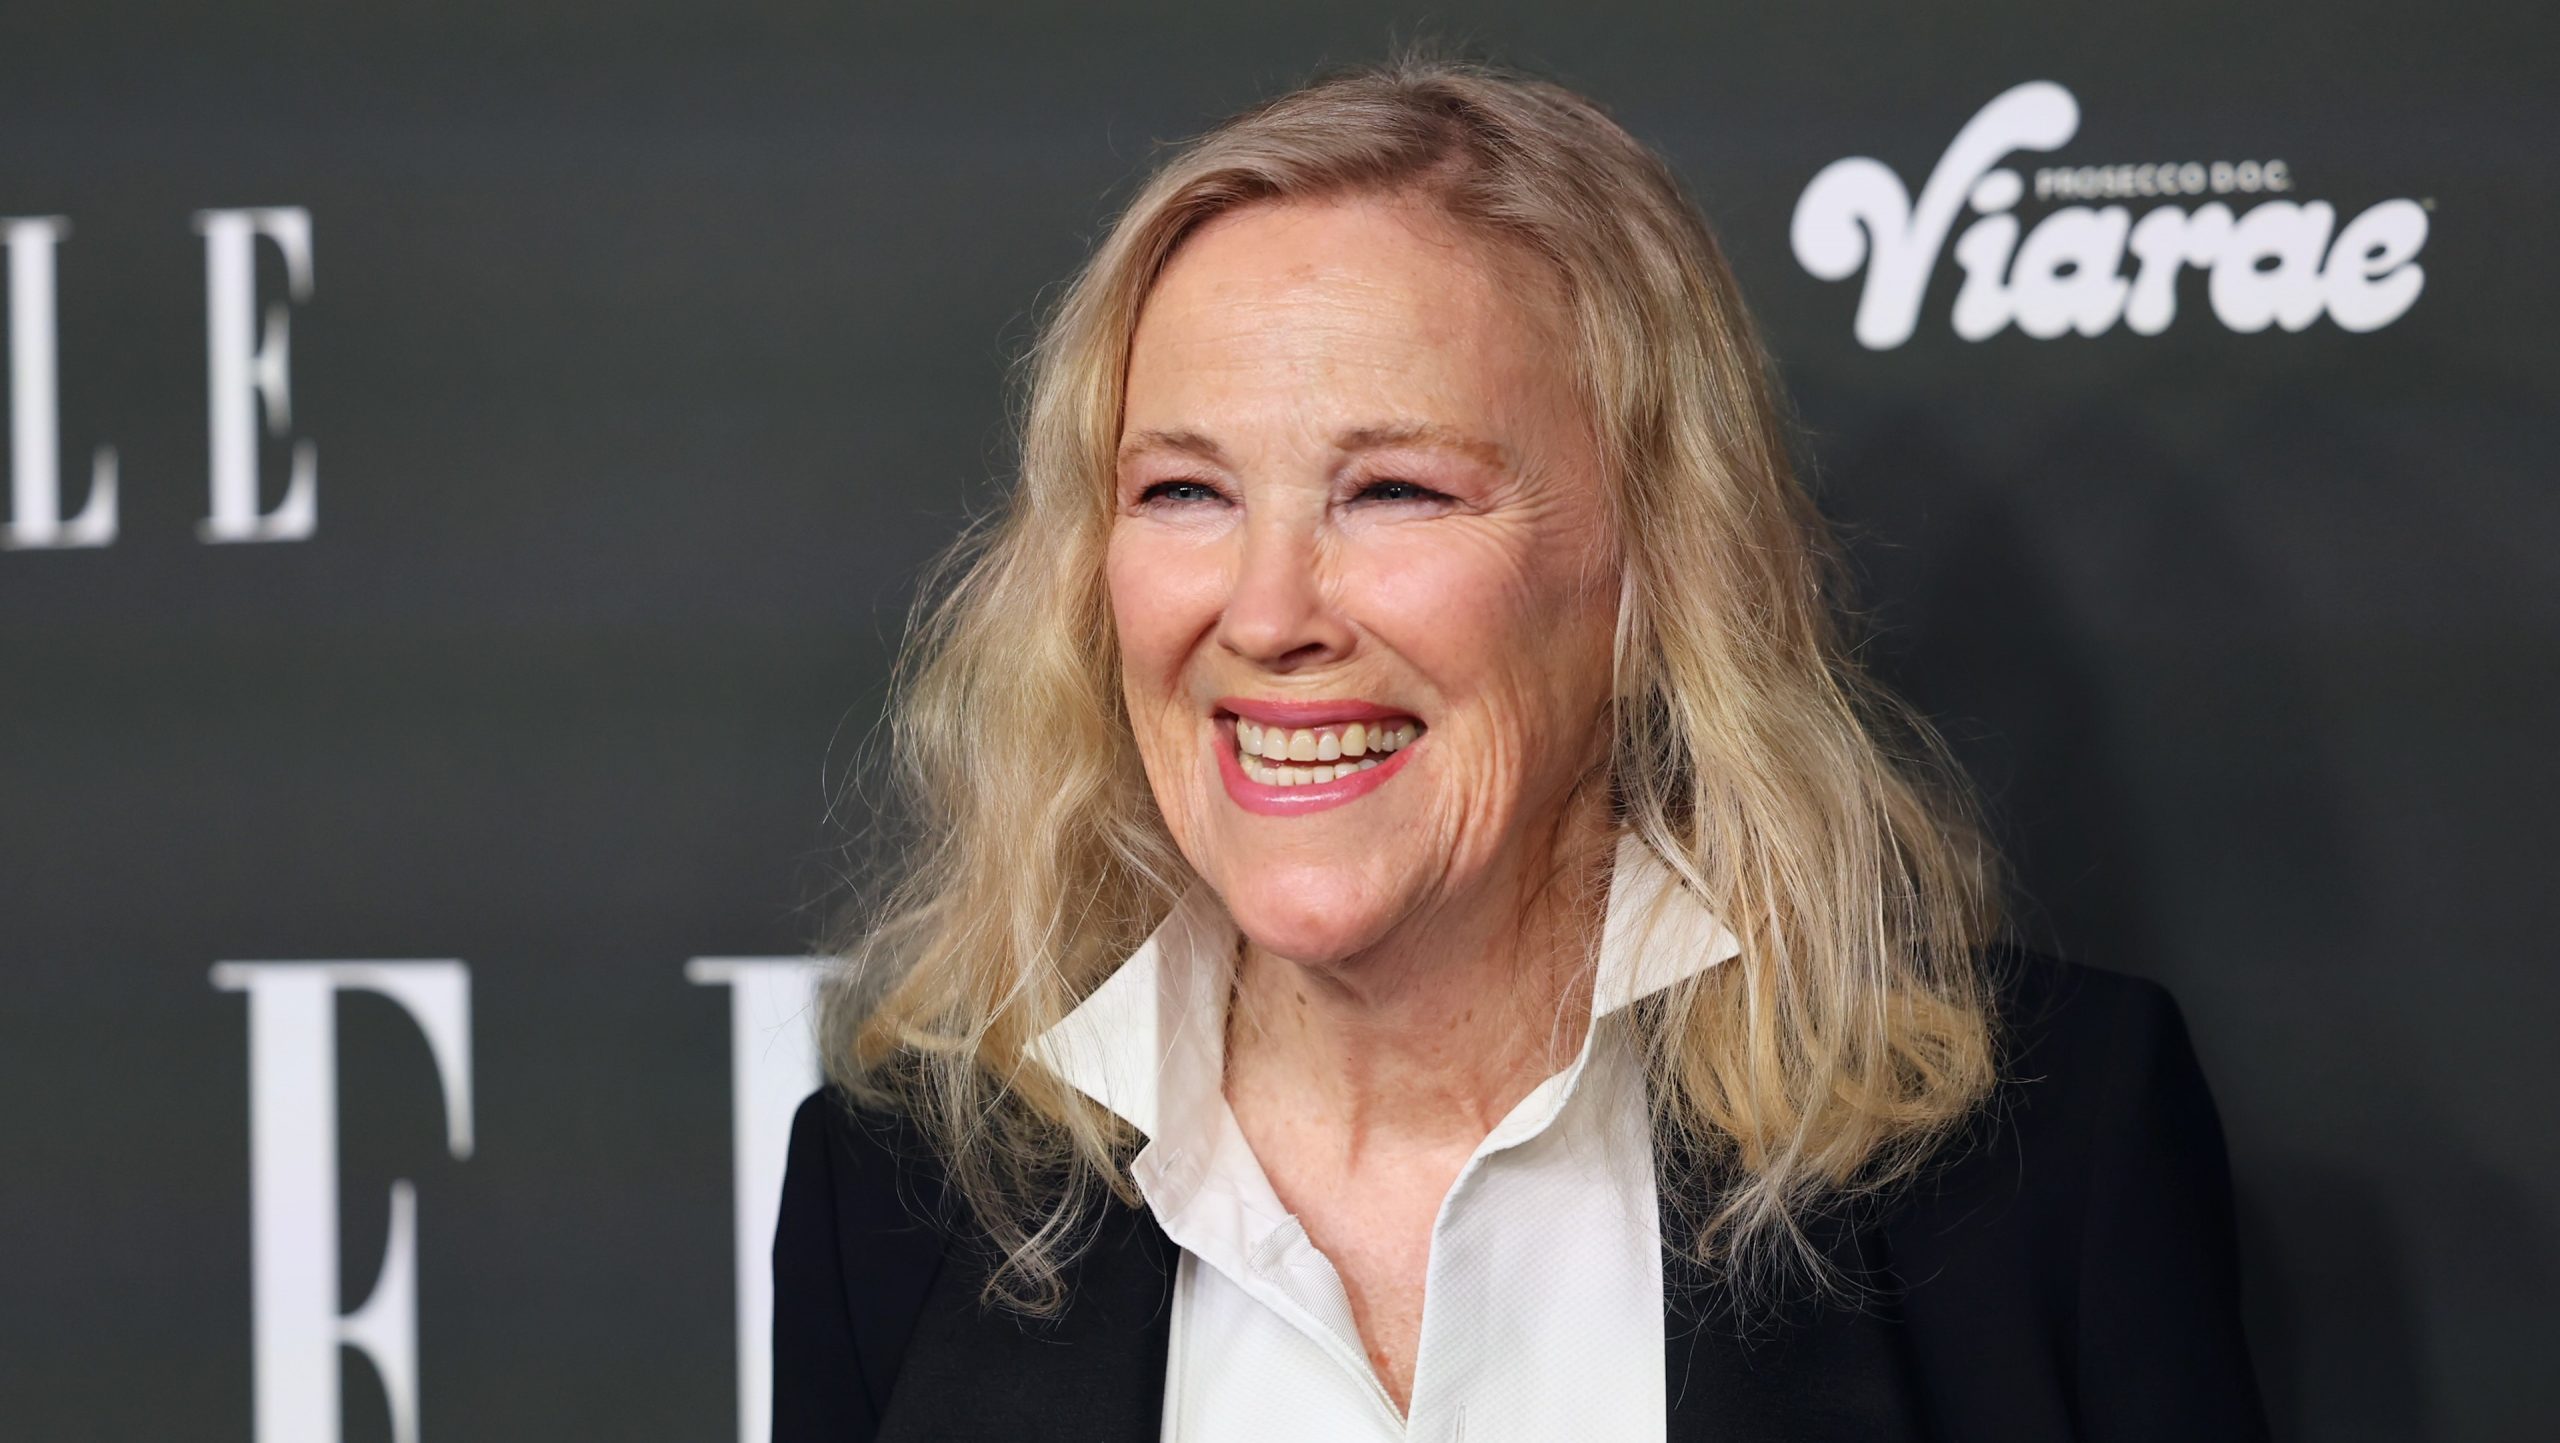 Schitt’s Creek star Catherine O’Hara joins HBO’s The Last of Us in an ‘undisclosed role’